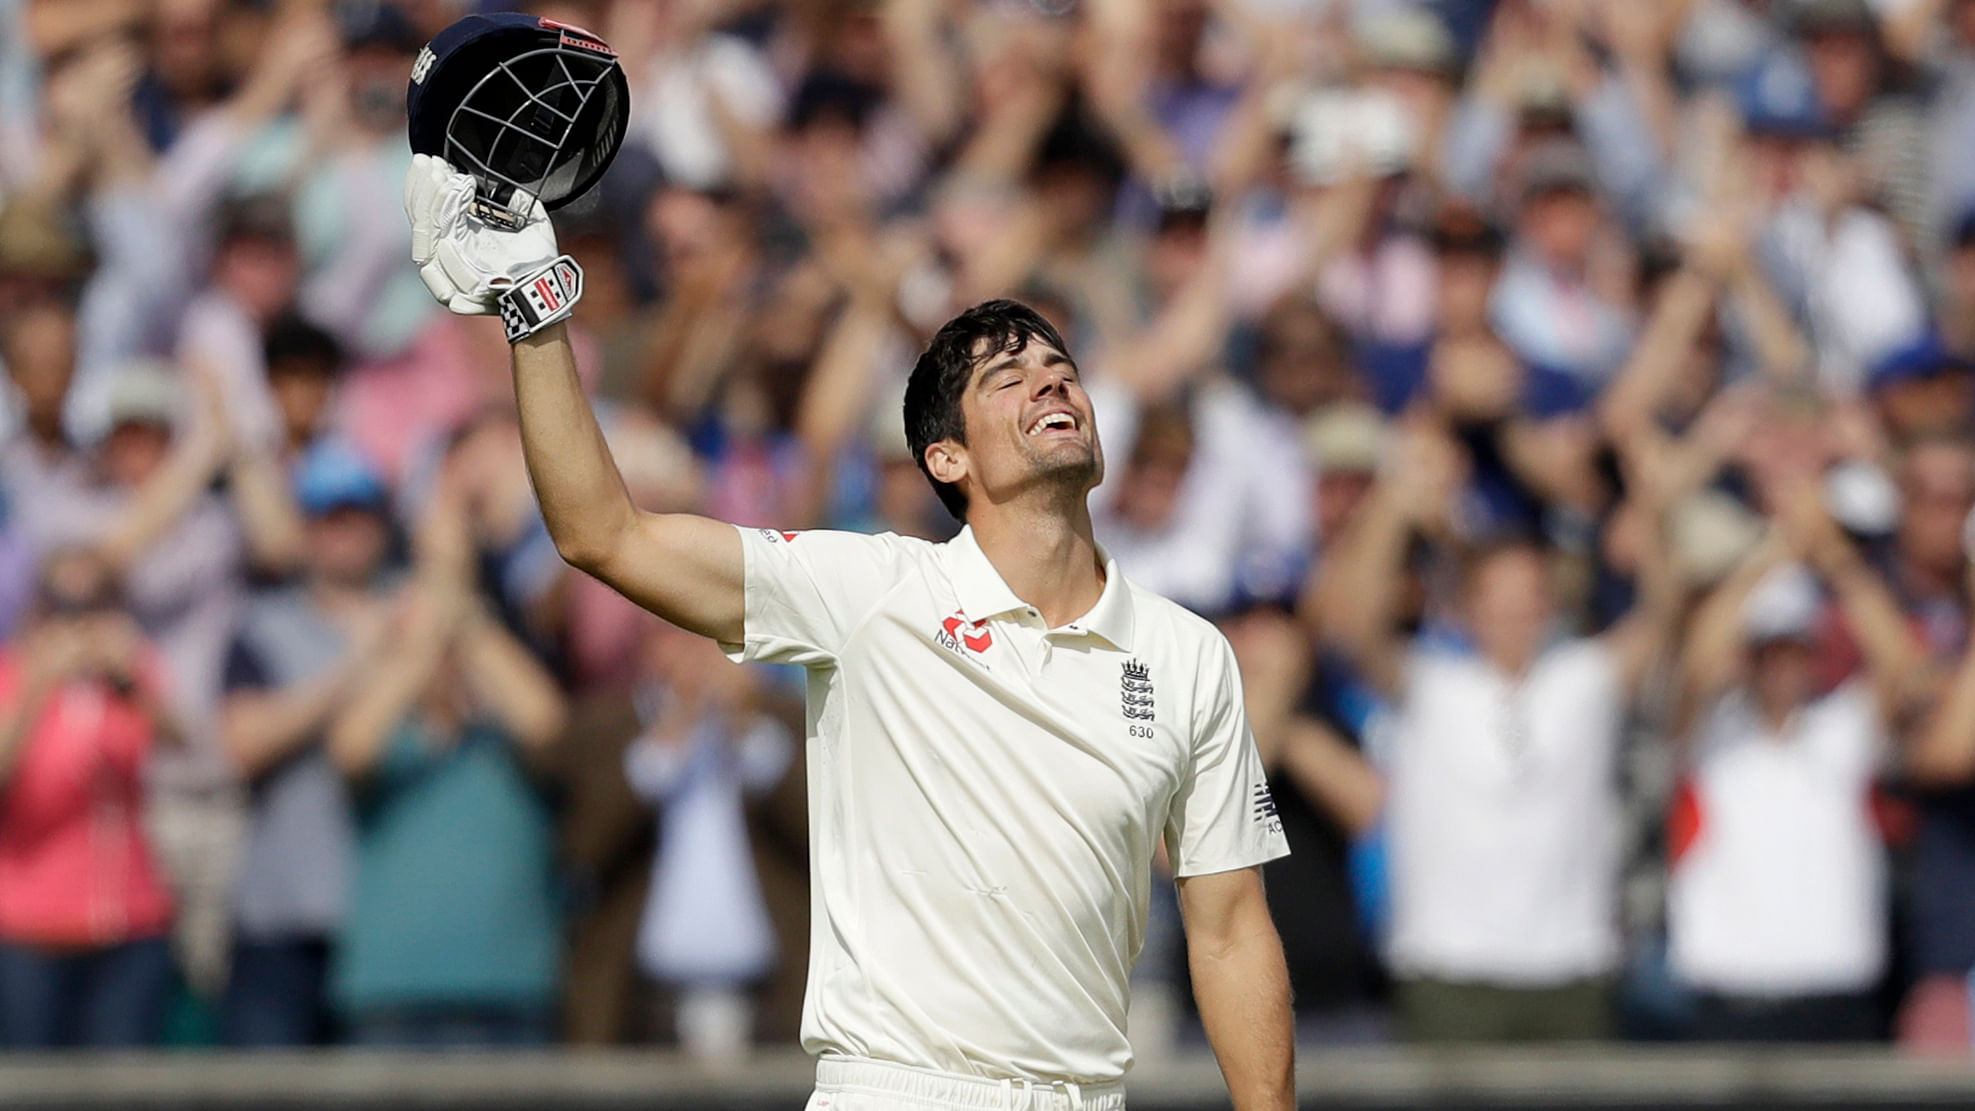 Alastair Cook celebrates his century on Day 4 of The Oval Test against India.